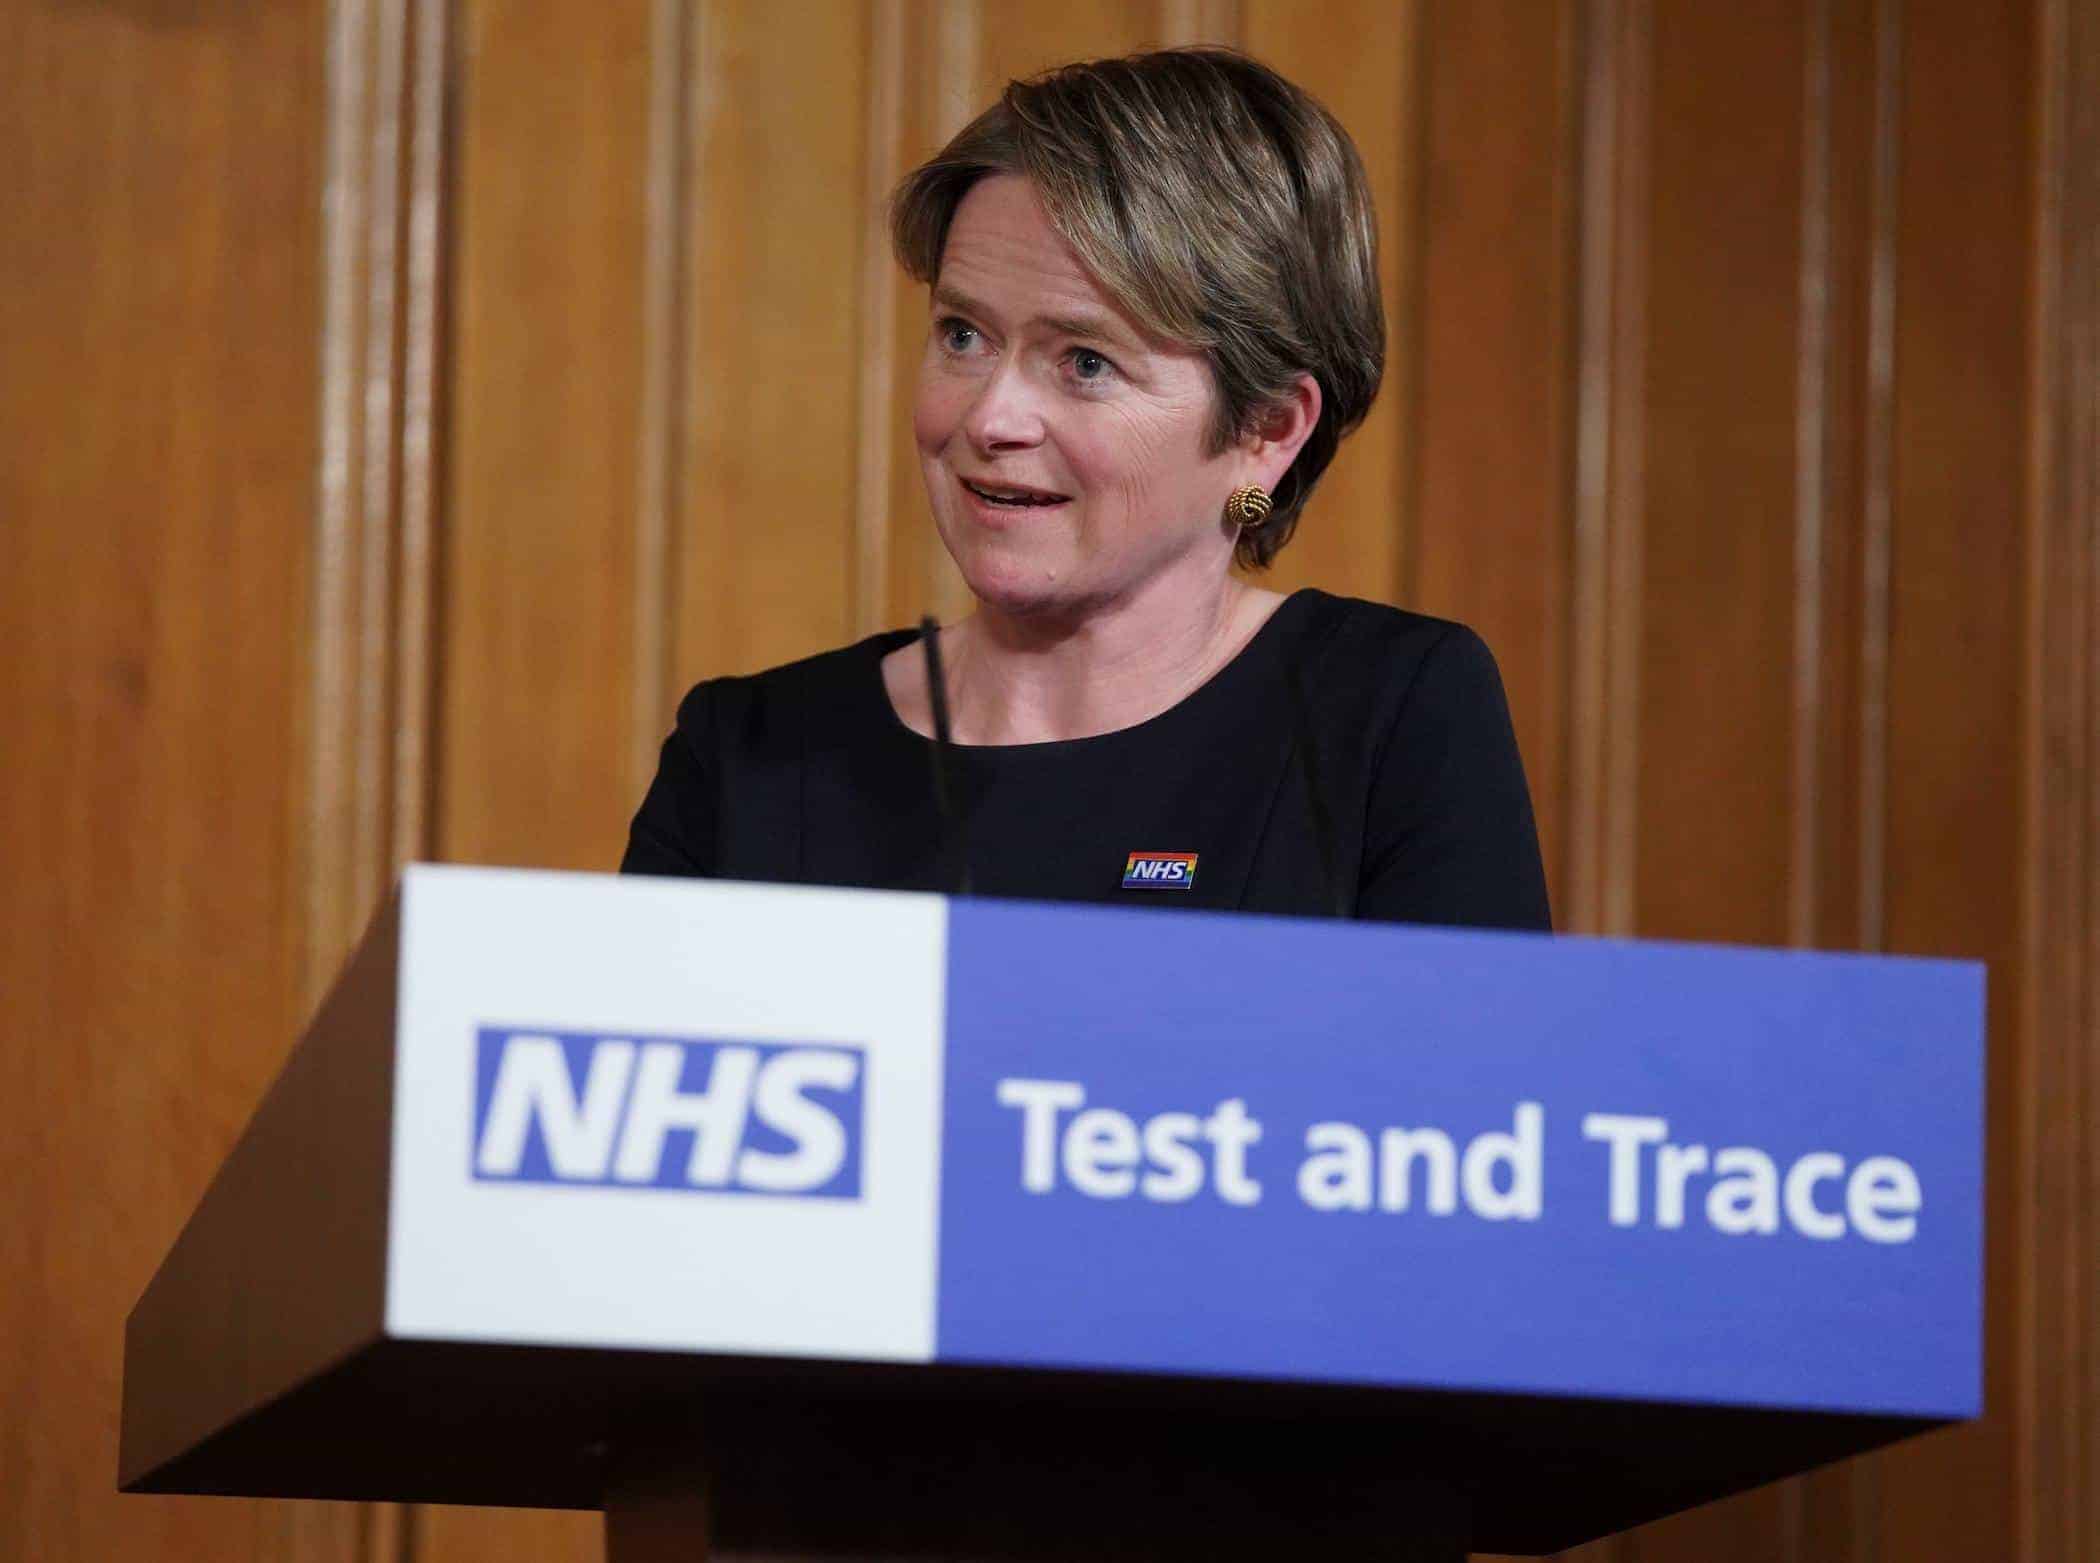 Dido Harding wants to be the next head of the NHS